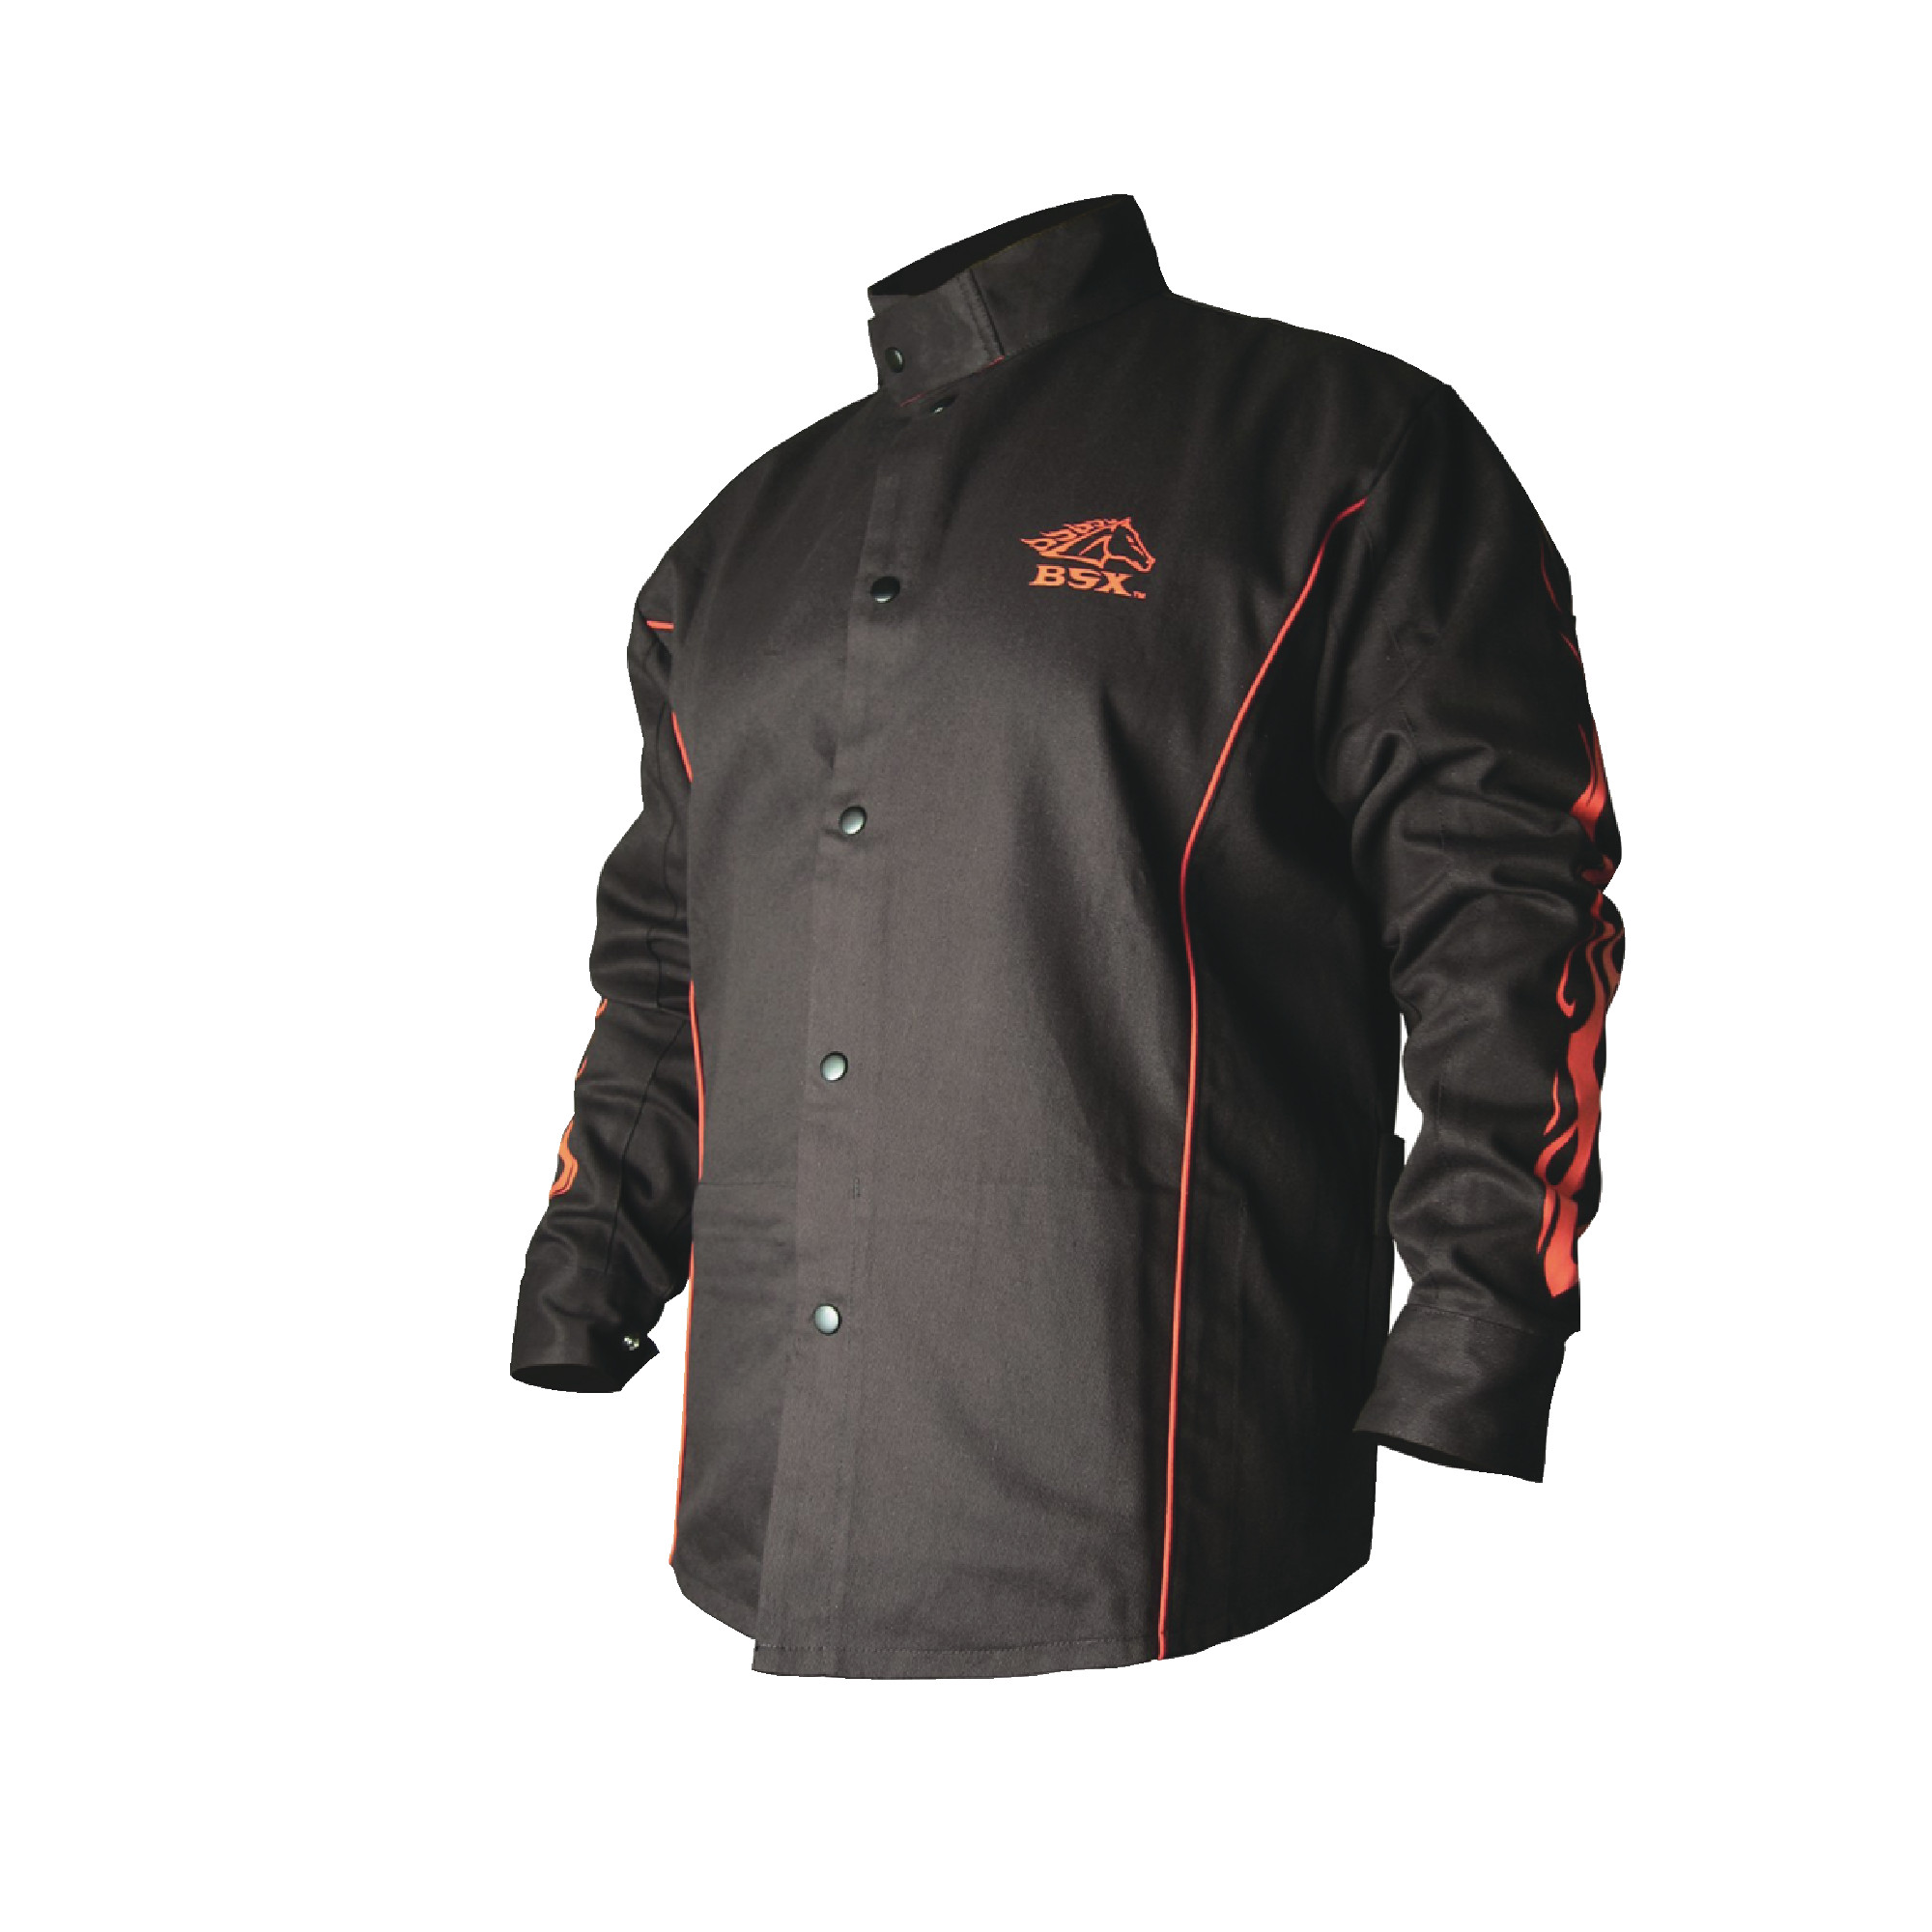 BSX Stryker Black With Red Flames Fire Resistant Welding Jacket - Size XXL